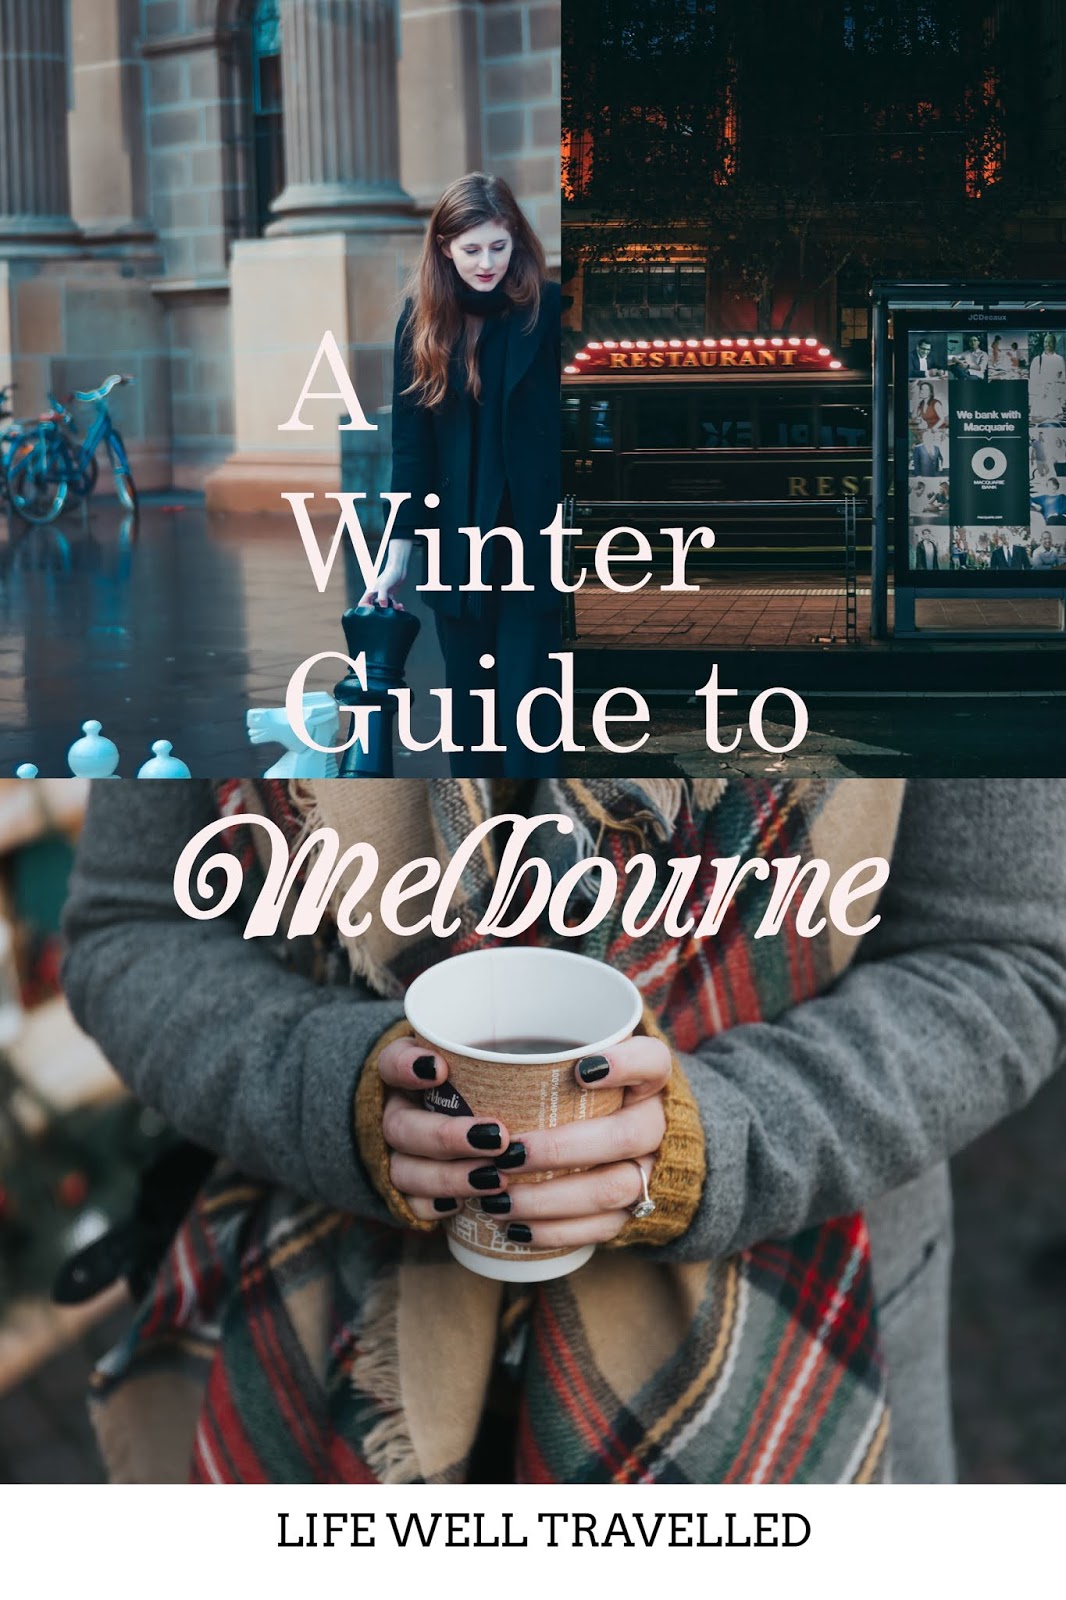 A Winter Guide to Melbourne